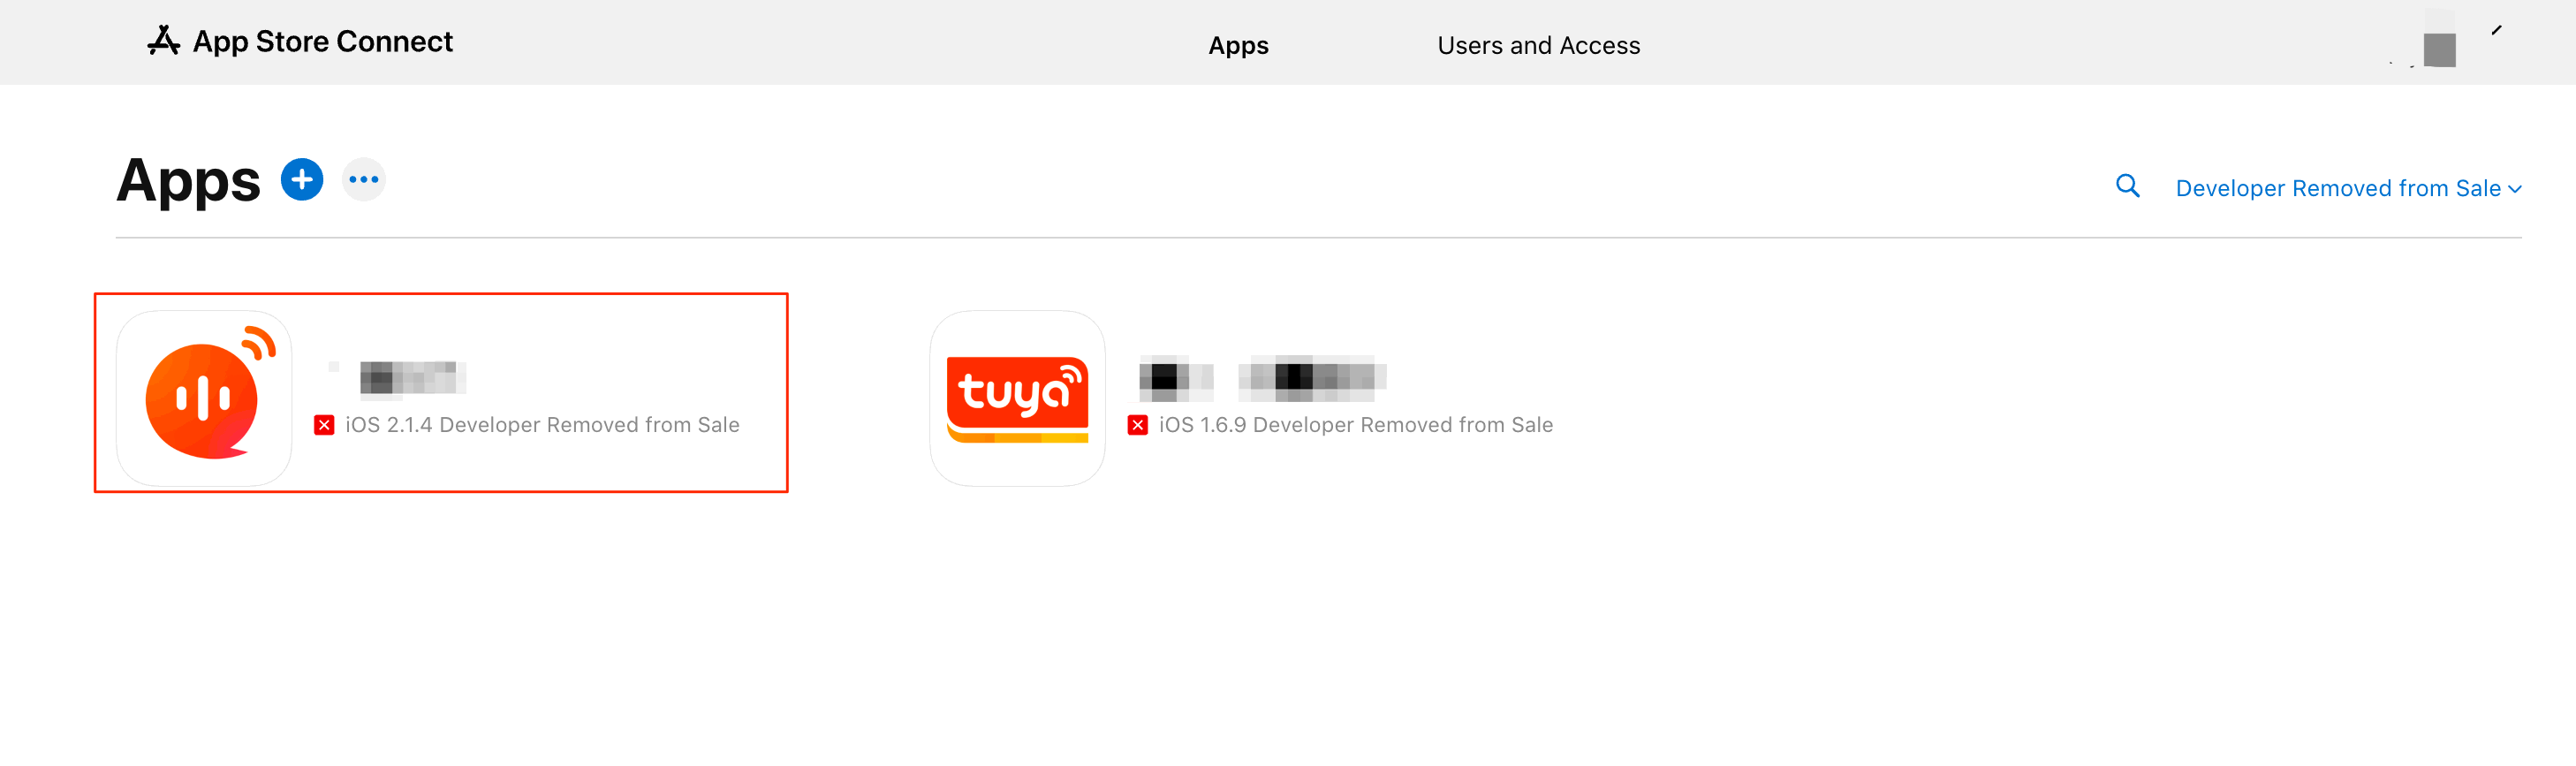 Get App ID from App Store Connect